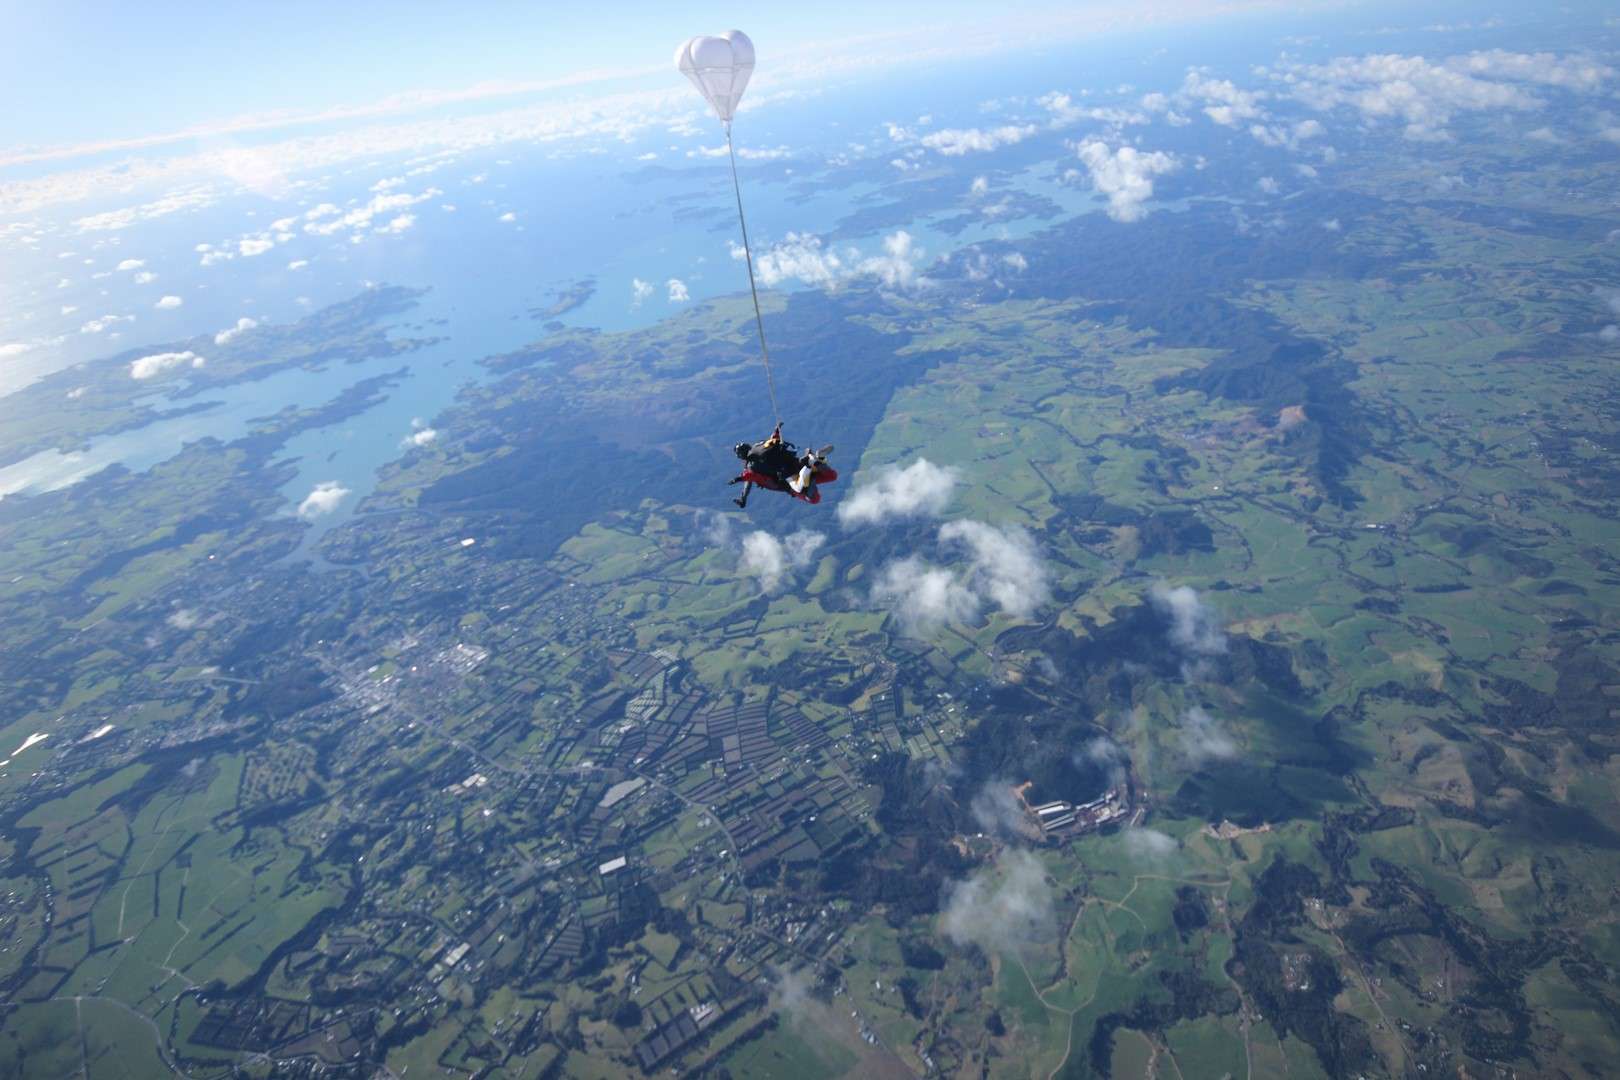 Stunning views skydiving over the Bay of Islands